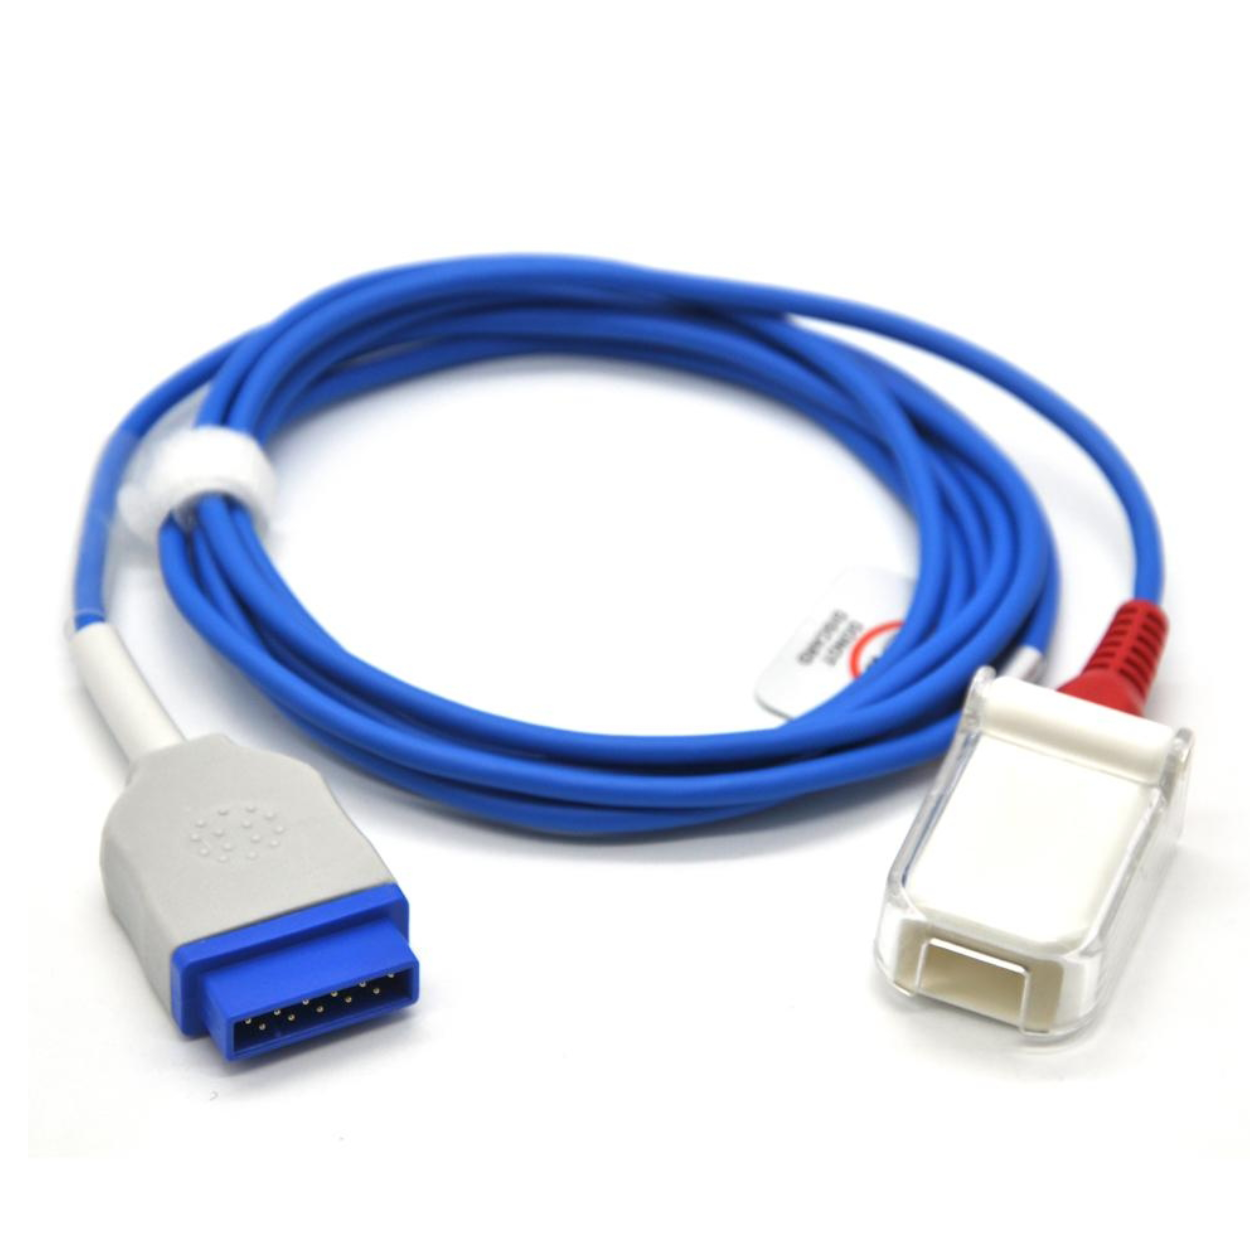 GE Spo2 Extension Cable